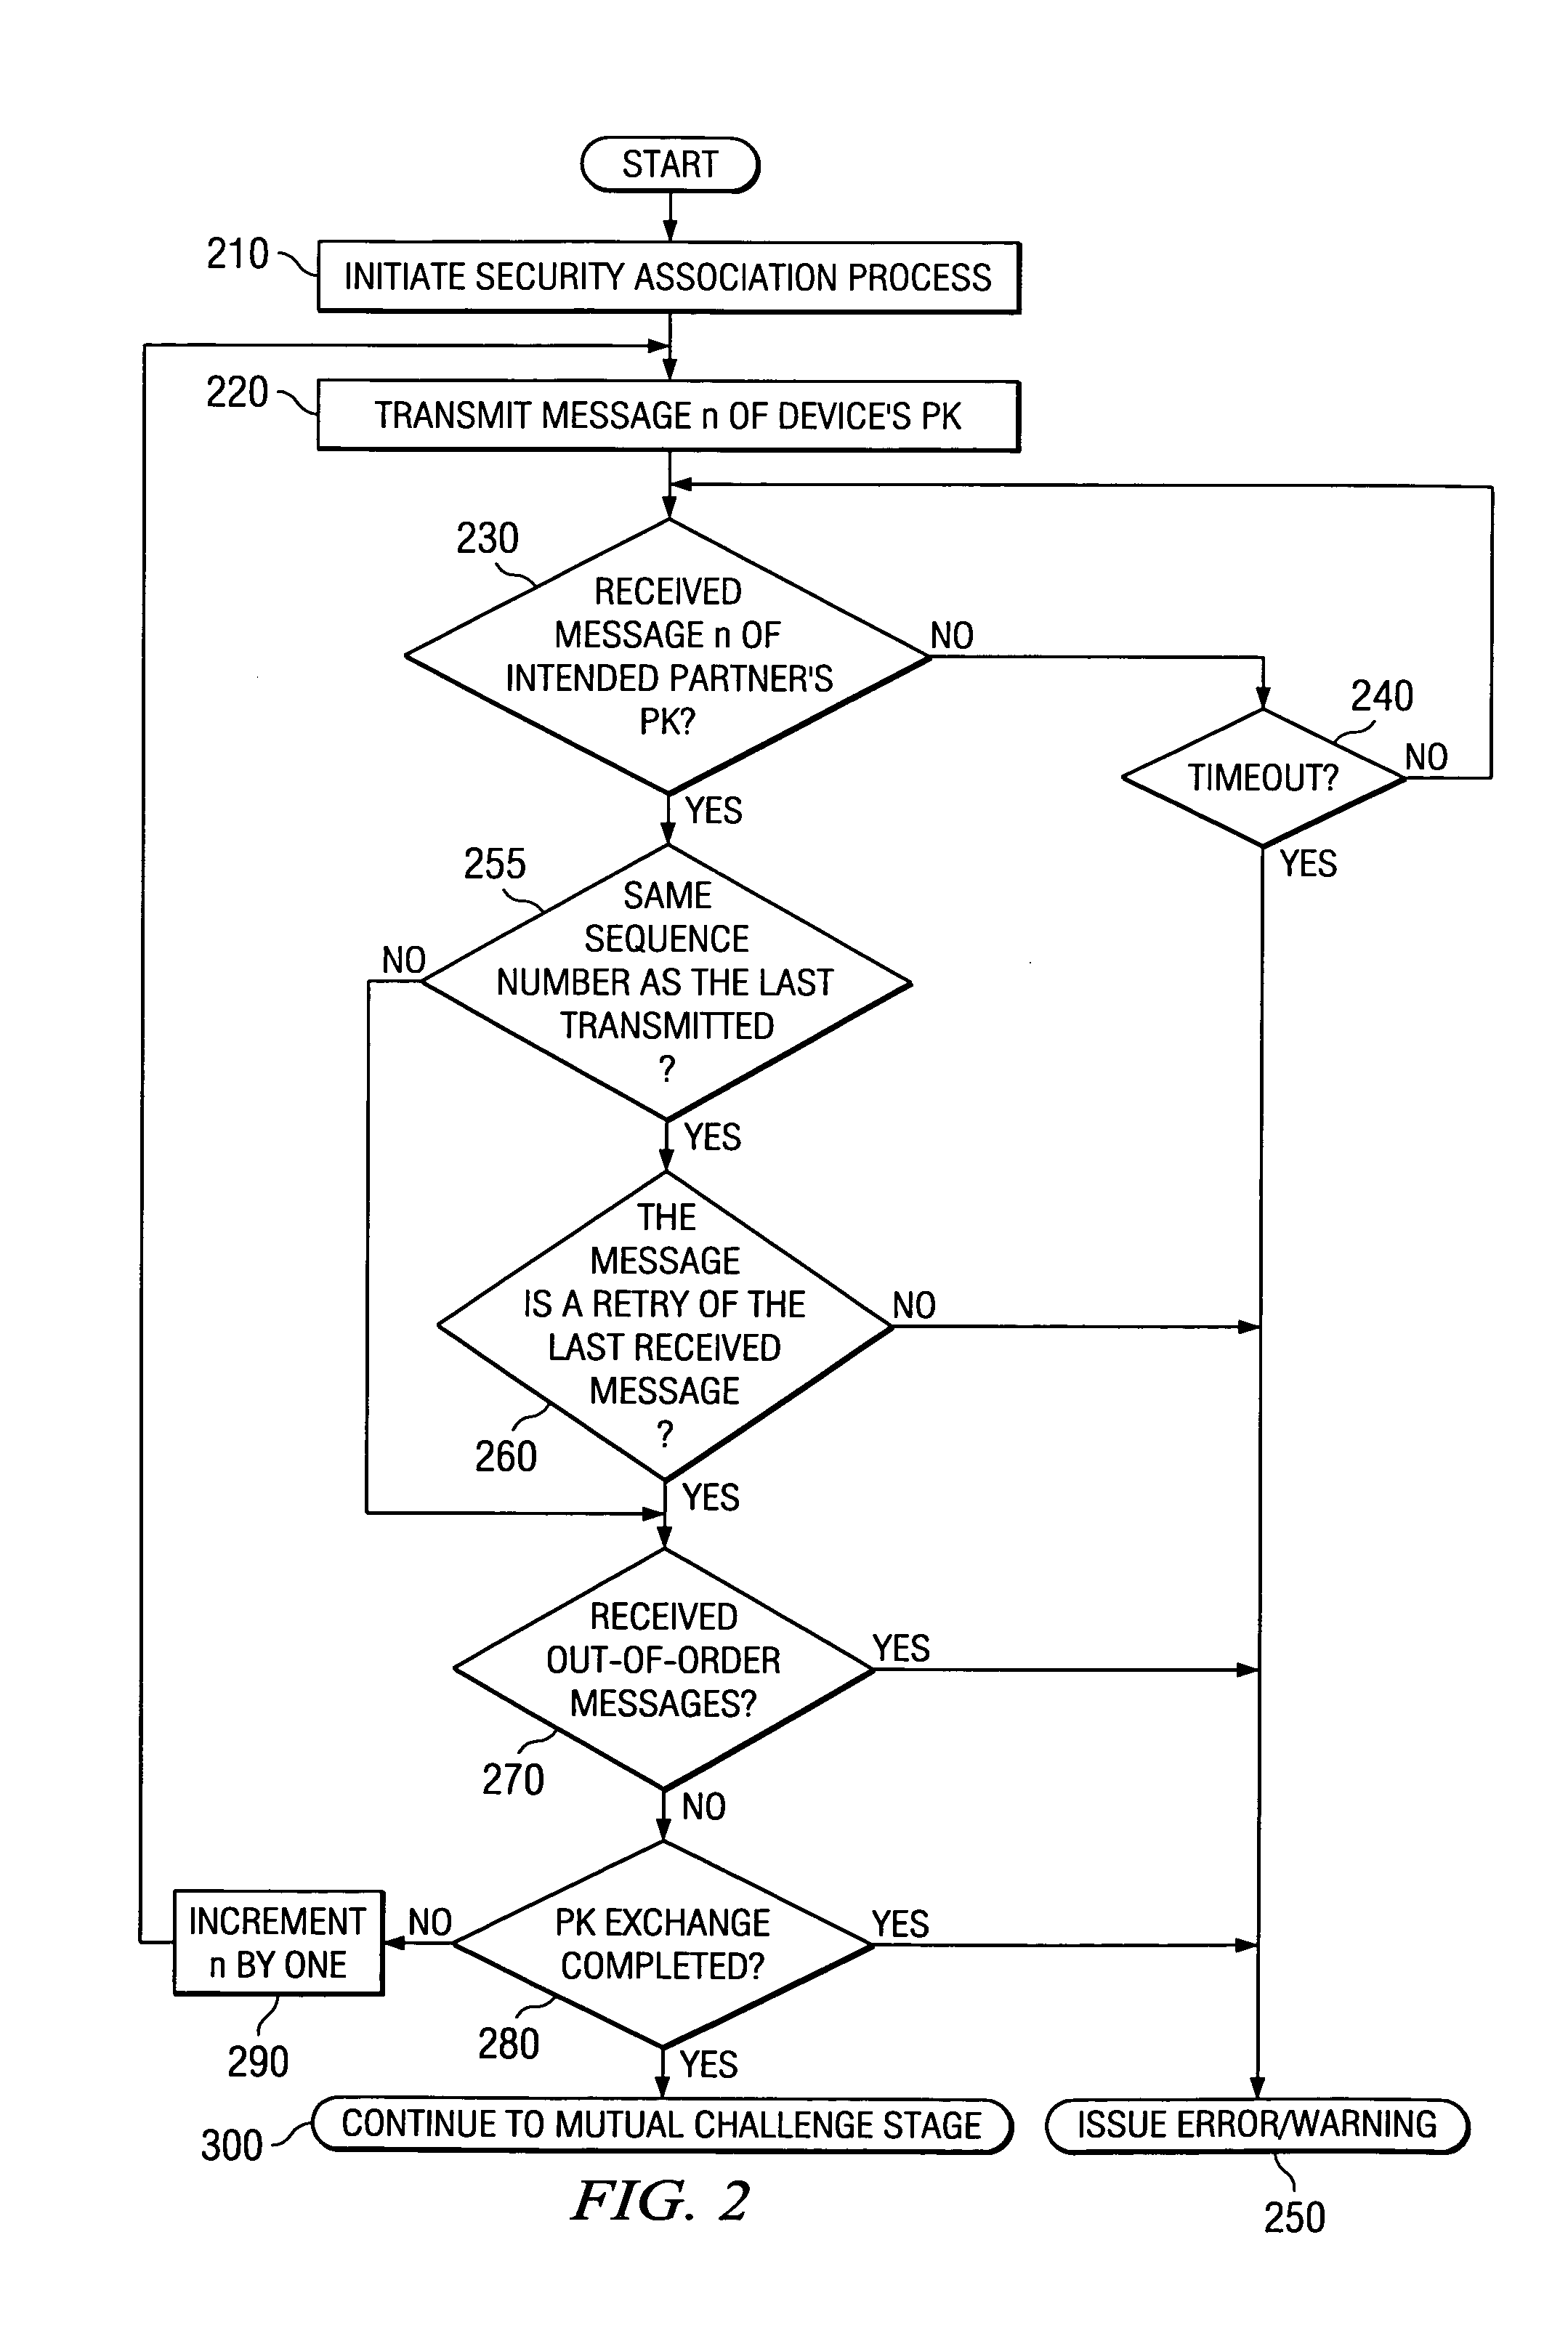 System and method for security association between communication devices within a wireless personal and local area network